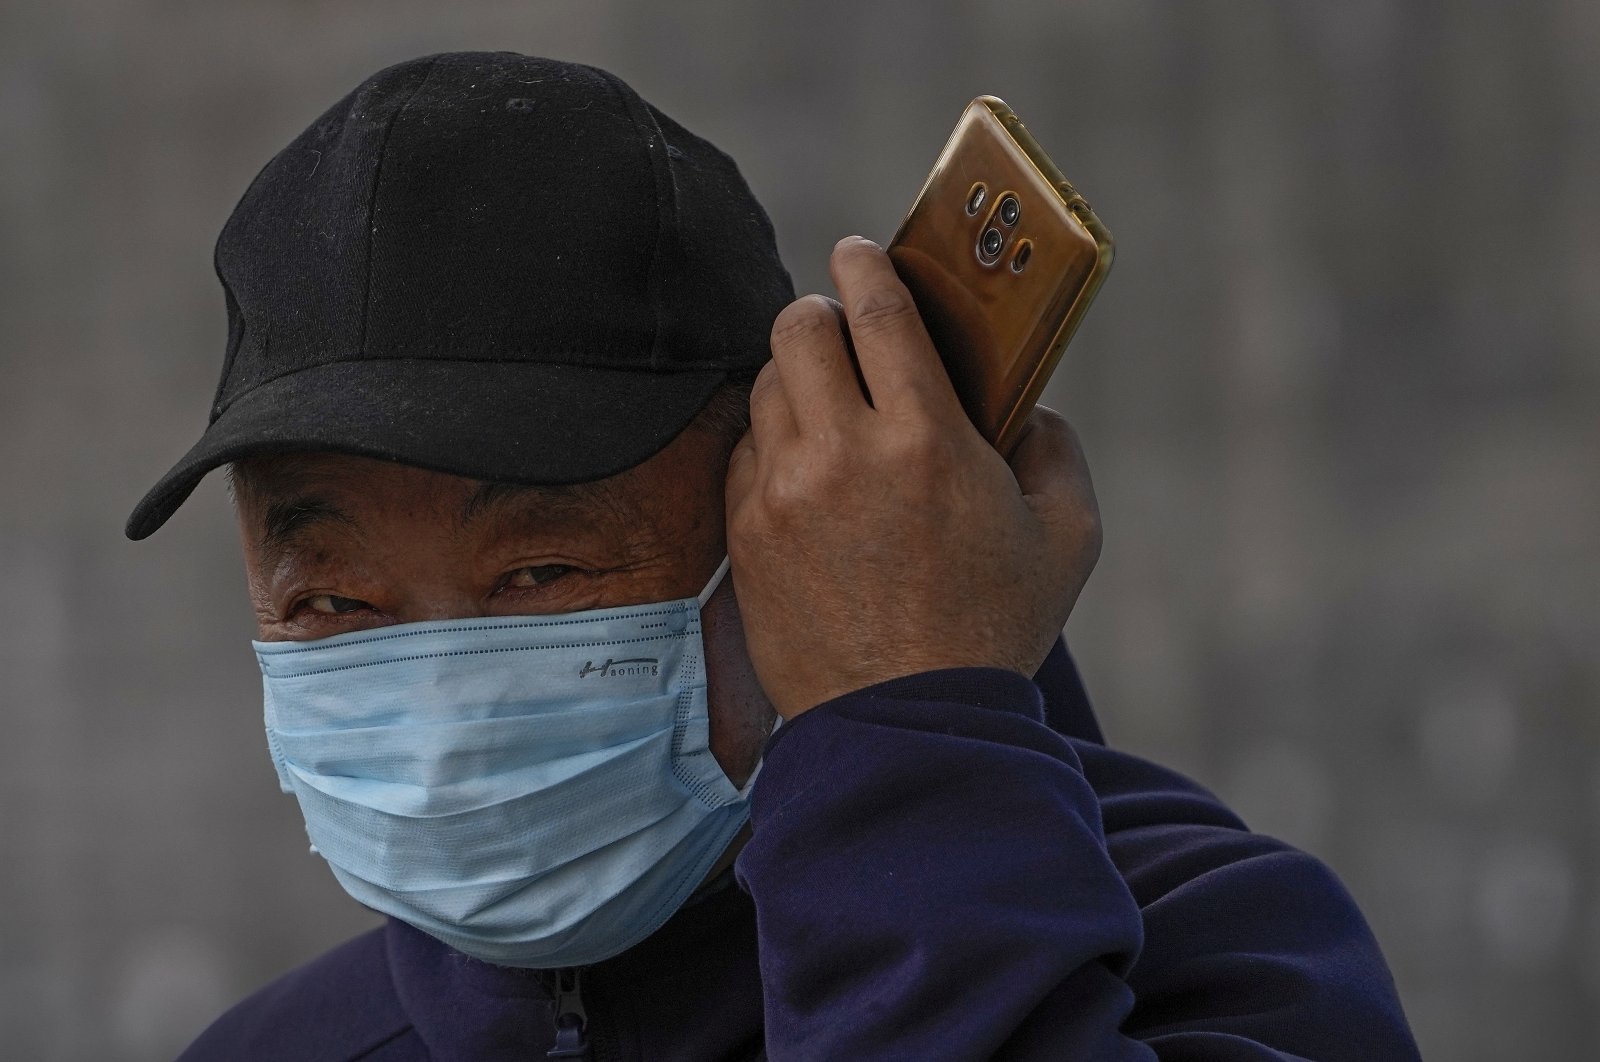 A man wearing a face mask to help curb the spread of the coronavirus listens to his smartphone on a street in Beijing, China, Oct. 28, 2021. (AP Photo)